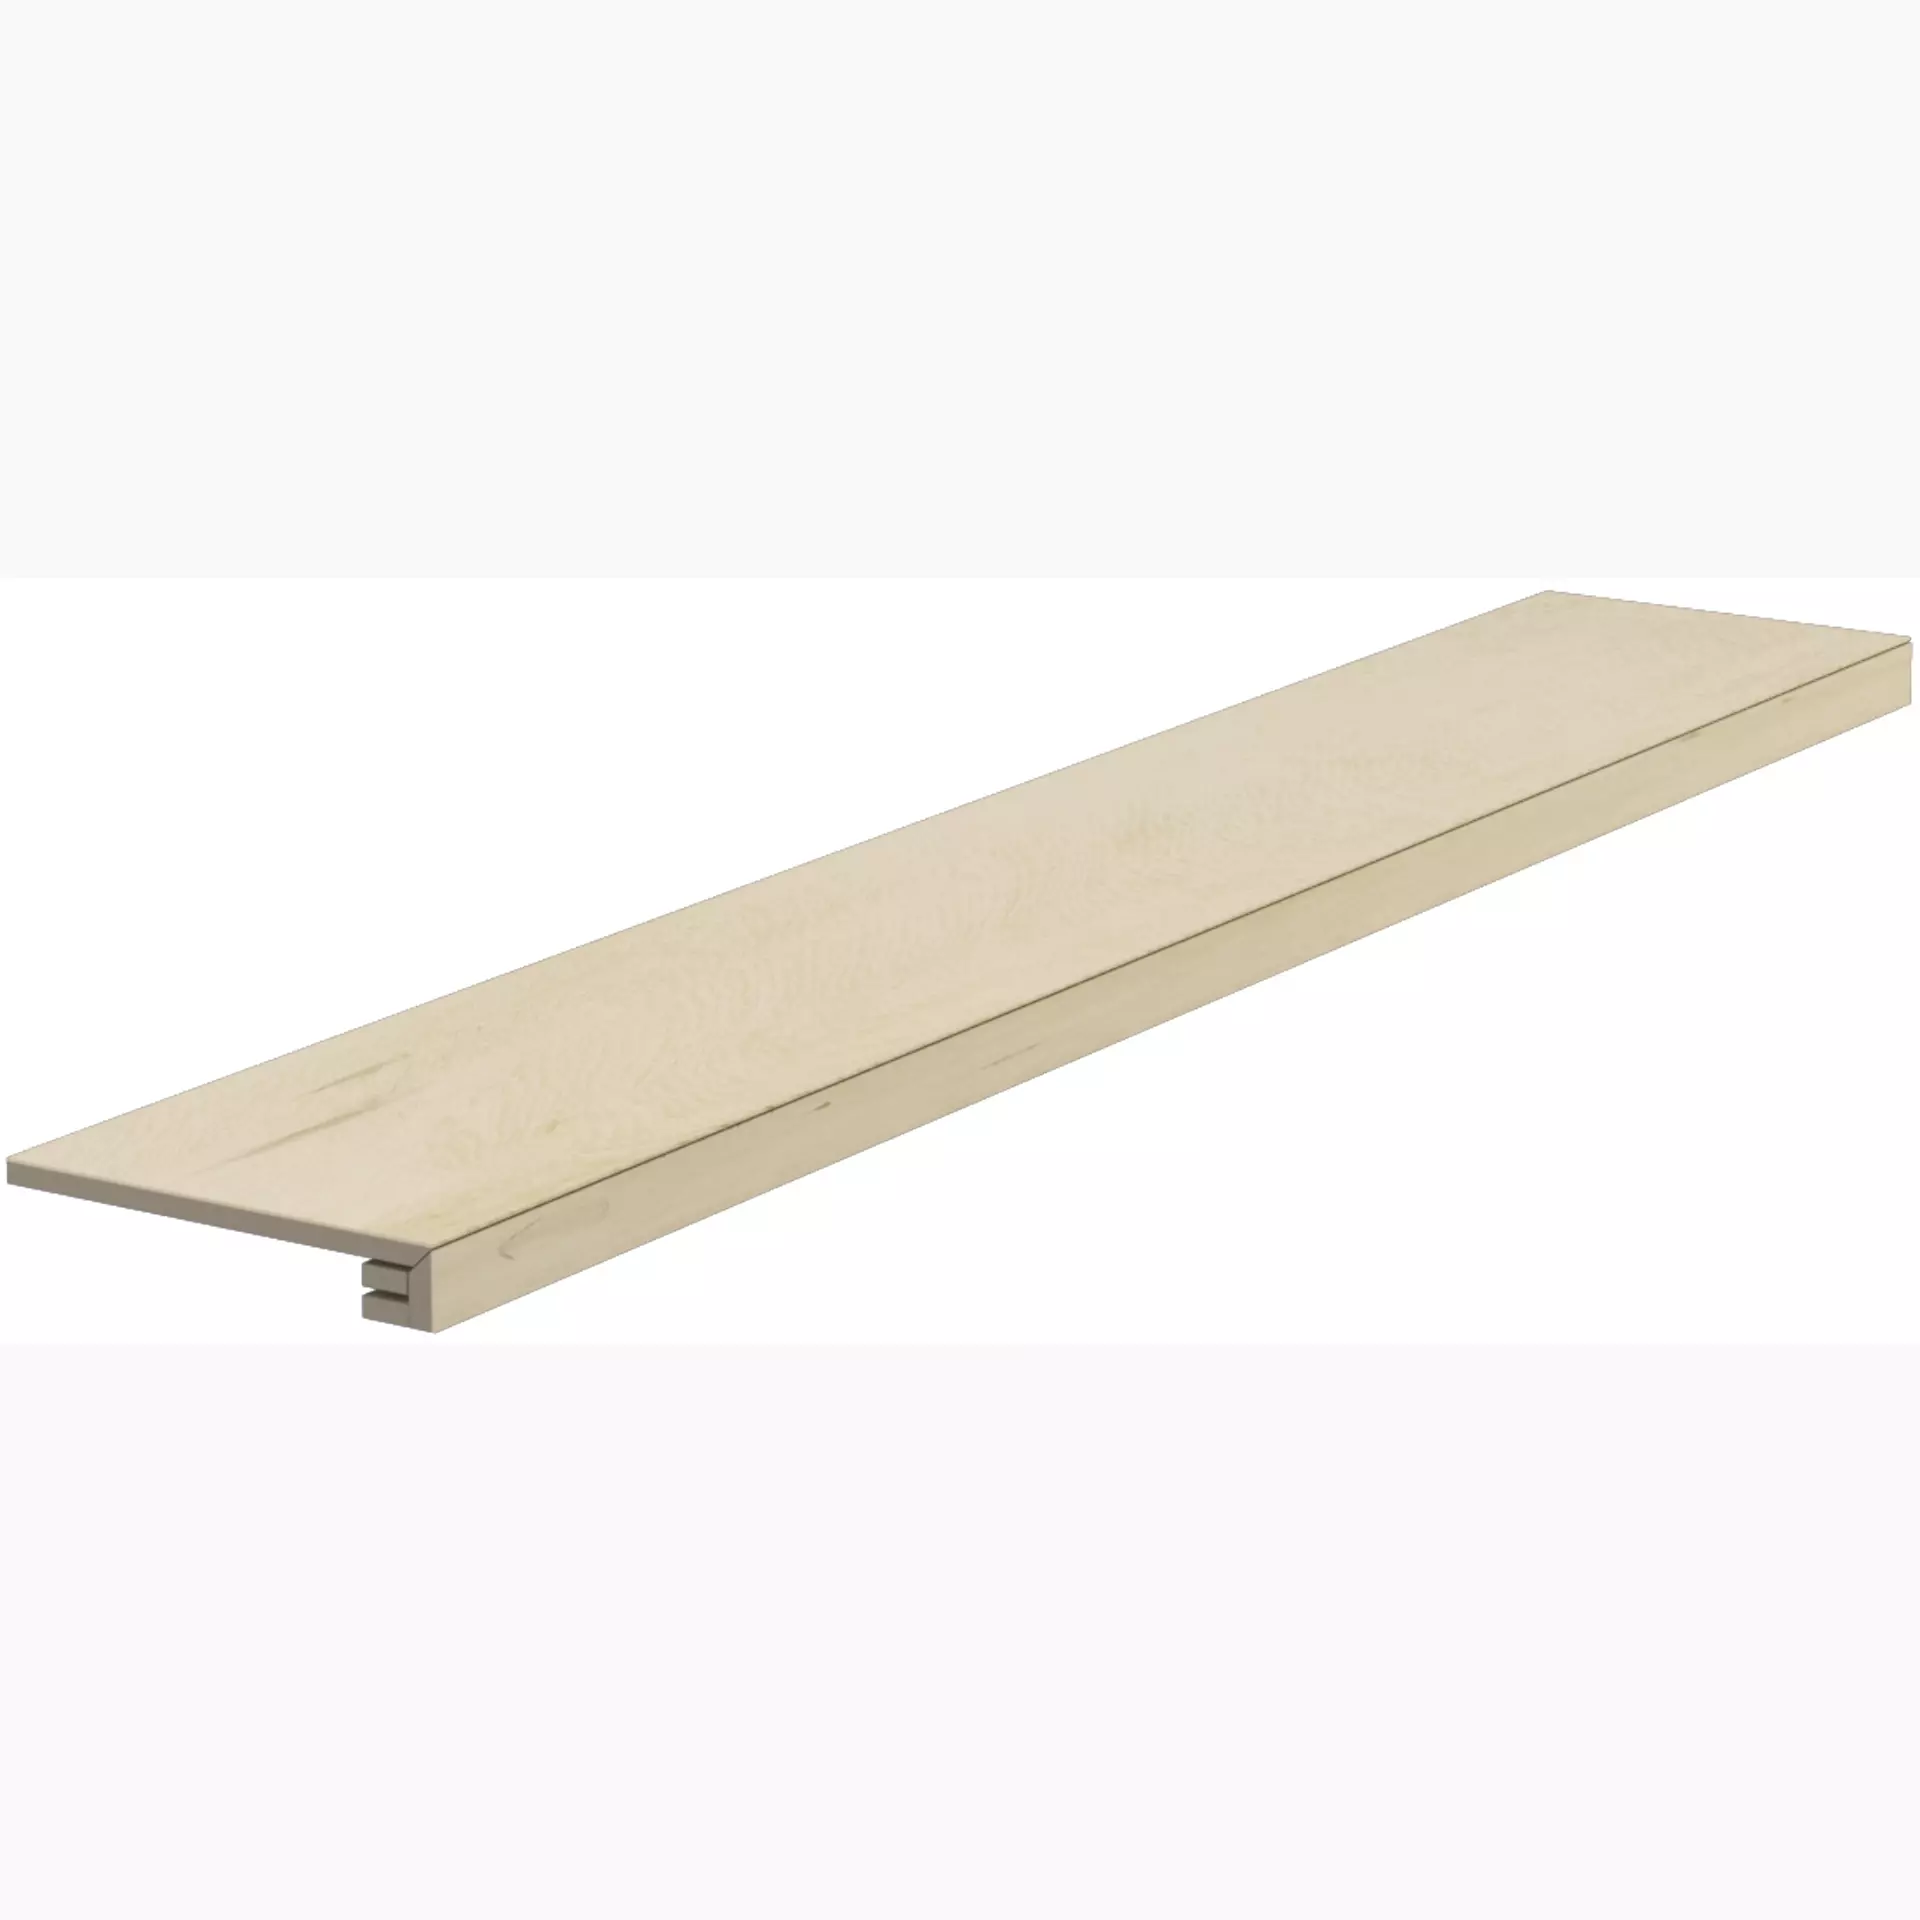 Del Conca Nb Nabi Natural Nb10 Naturale Step plate Lineare 21NB10RG 20x120cm rectified 8,5mm